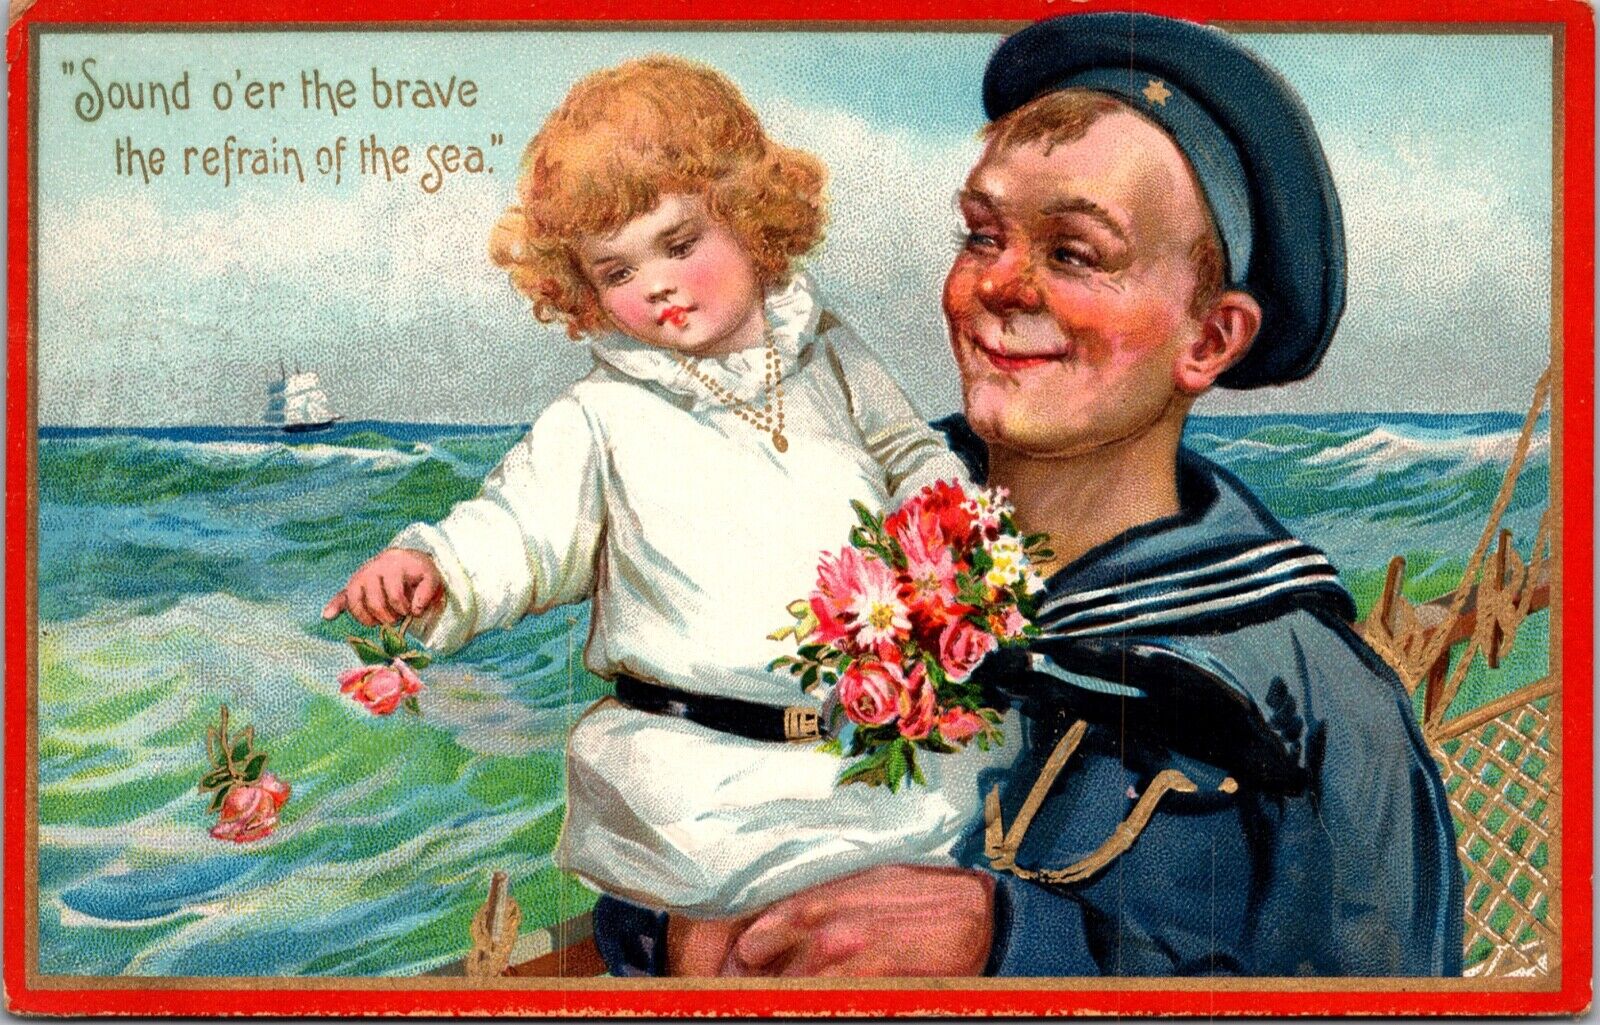 Tuck Decoration Day postcard Sound o’er the brave the refrain of the sea sailor 